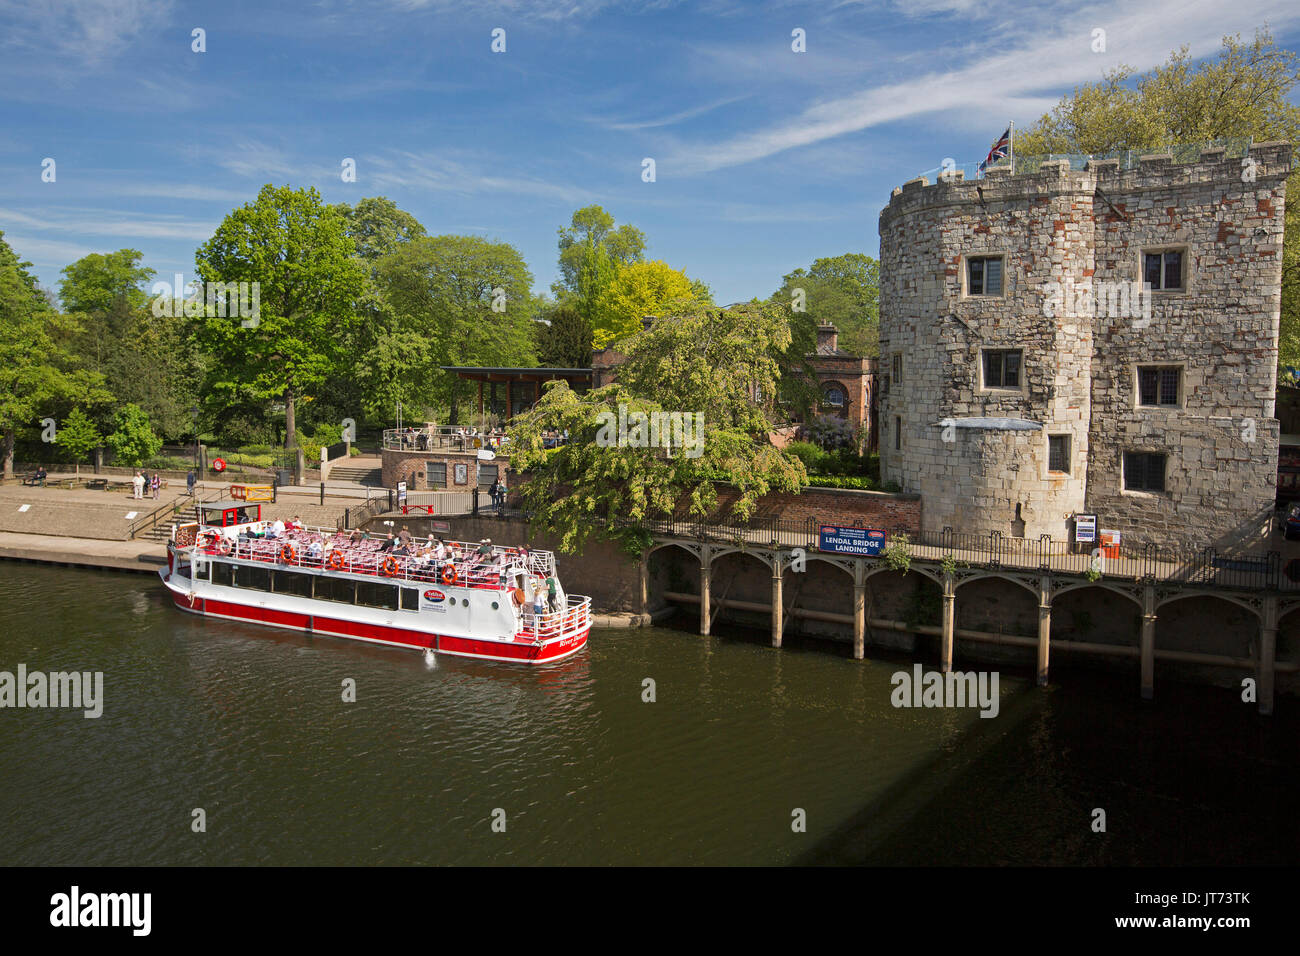 Tour boat with passengers on calm wide waters of tree-lined River Ouse under blue sky at York, England Stock Photo